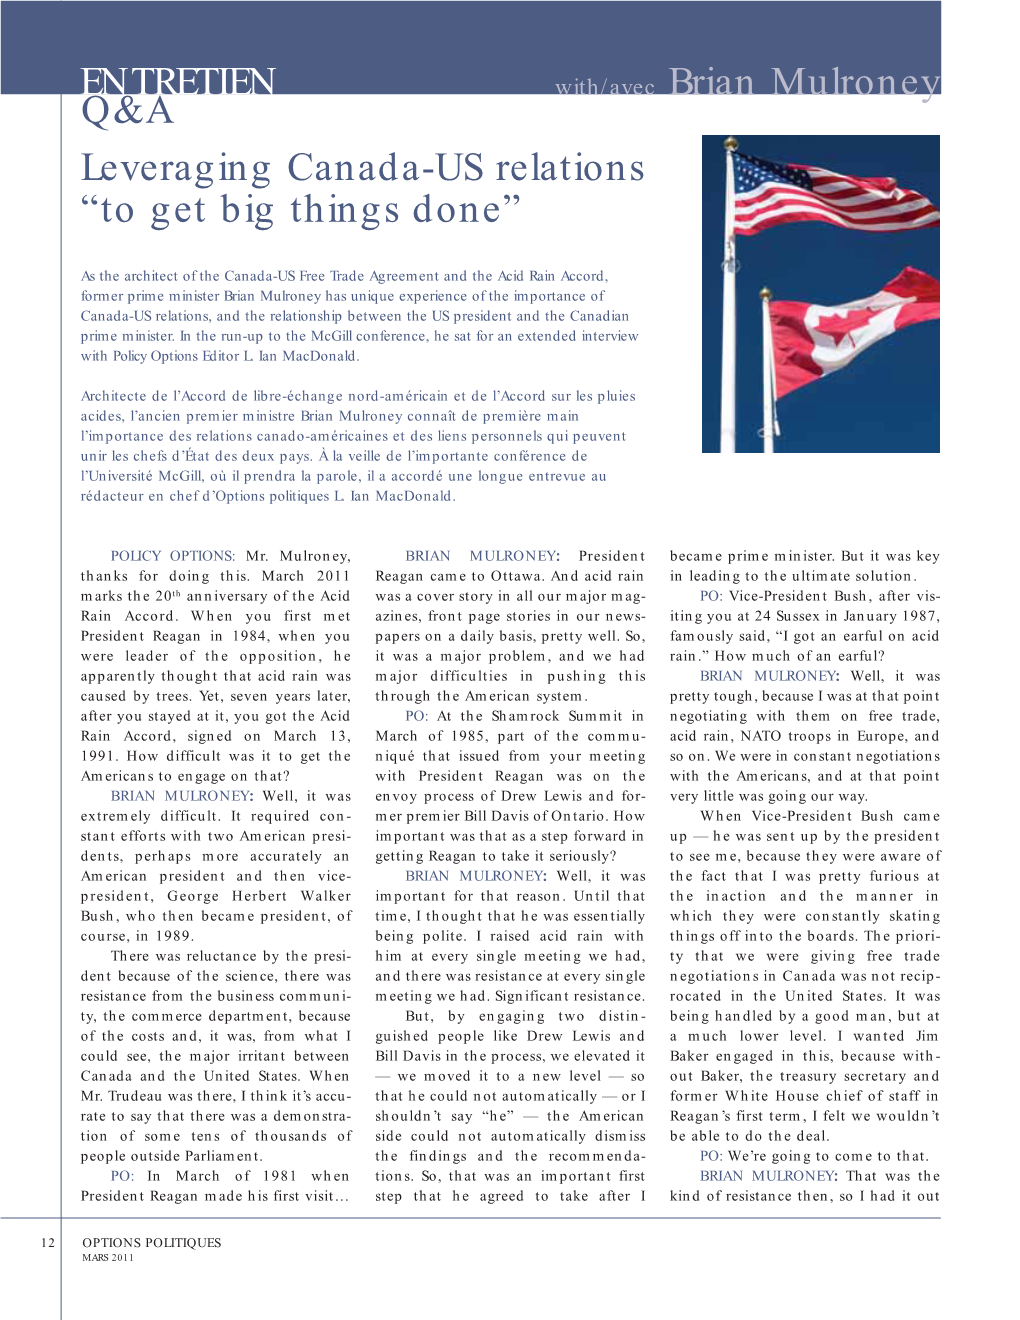 Leveraging Canada-US Relations “To Get Big Things Done” ENTRETIEN